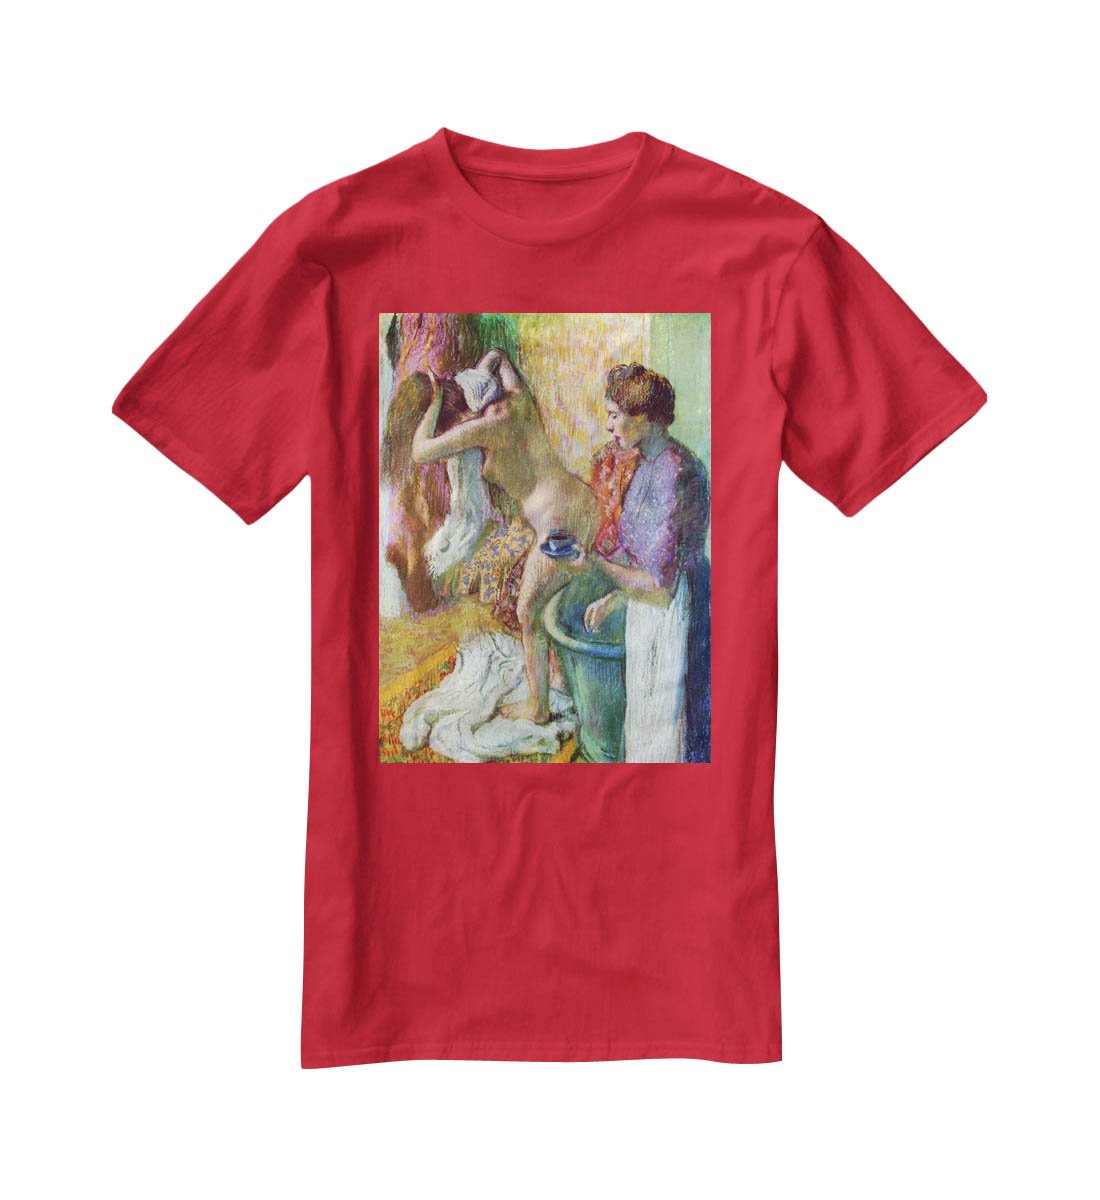 After bathing 1 by Degas T-Shirt - Canvas Art Rocks - 4